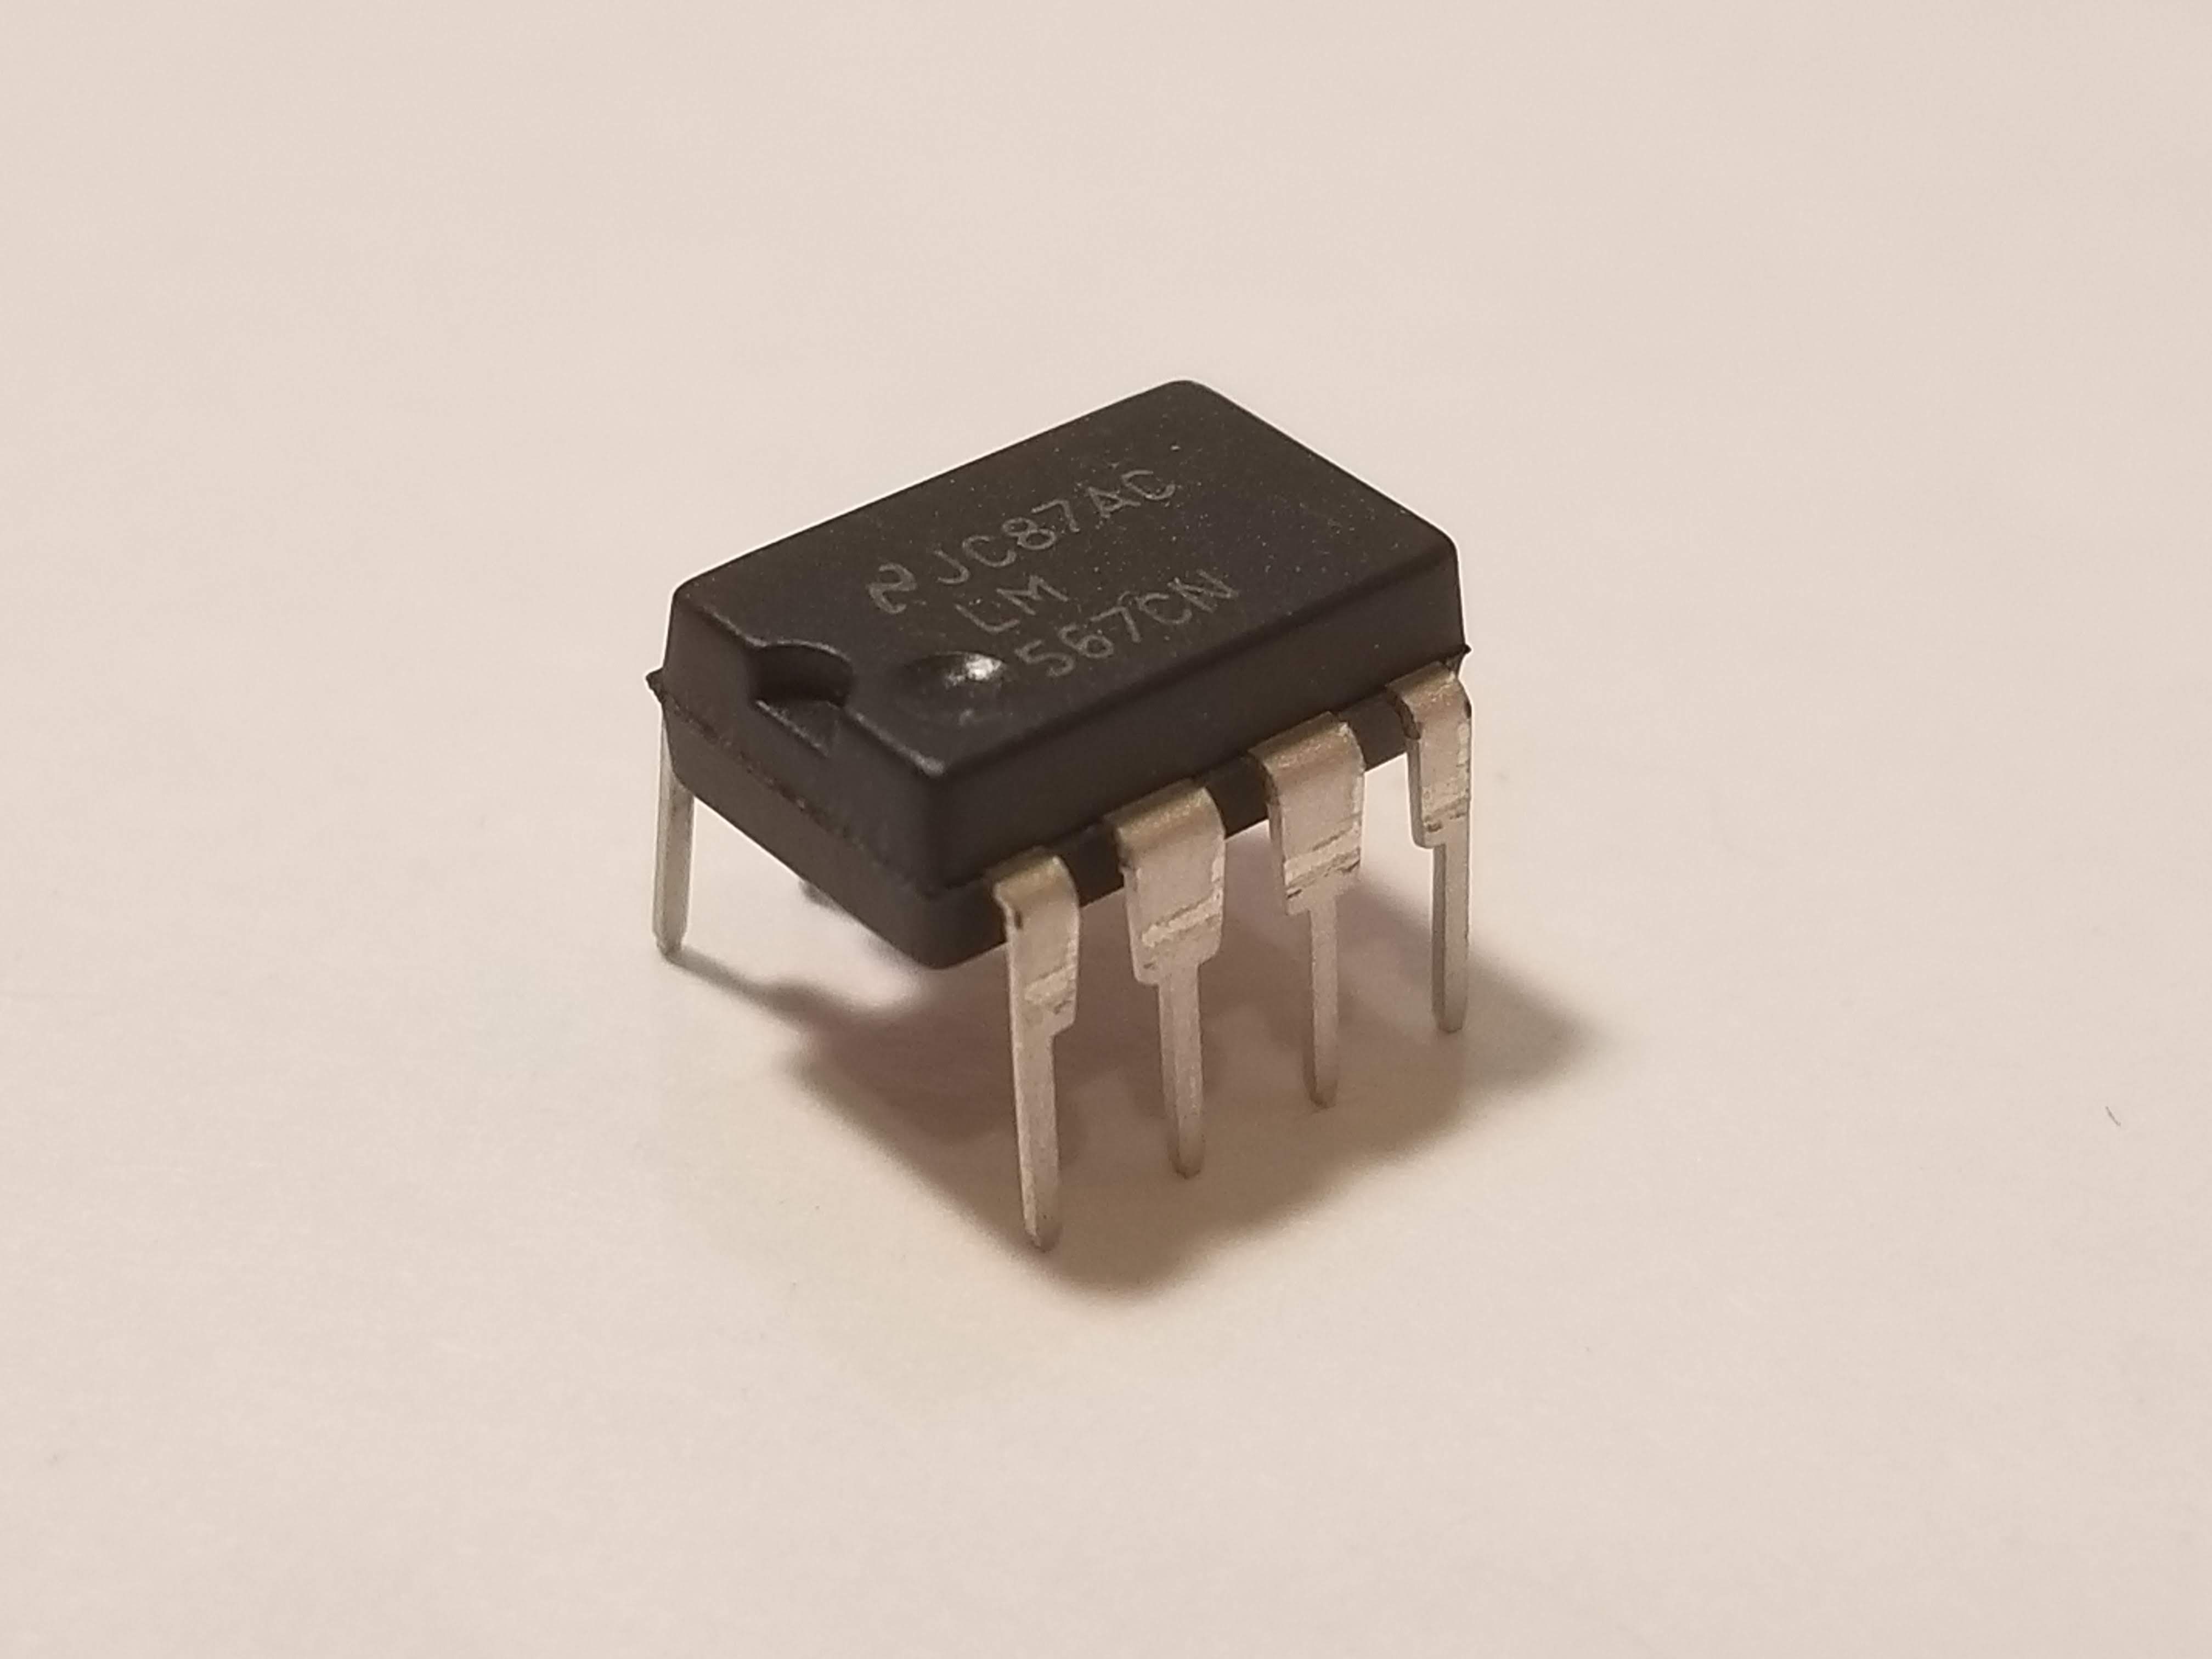 Picture of LM567 Tone Decoder